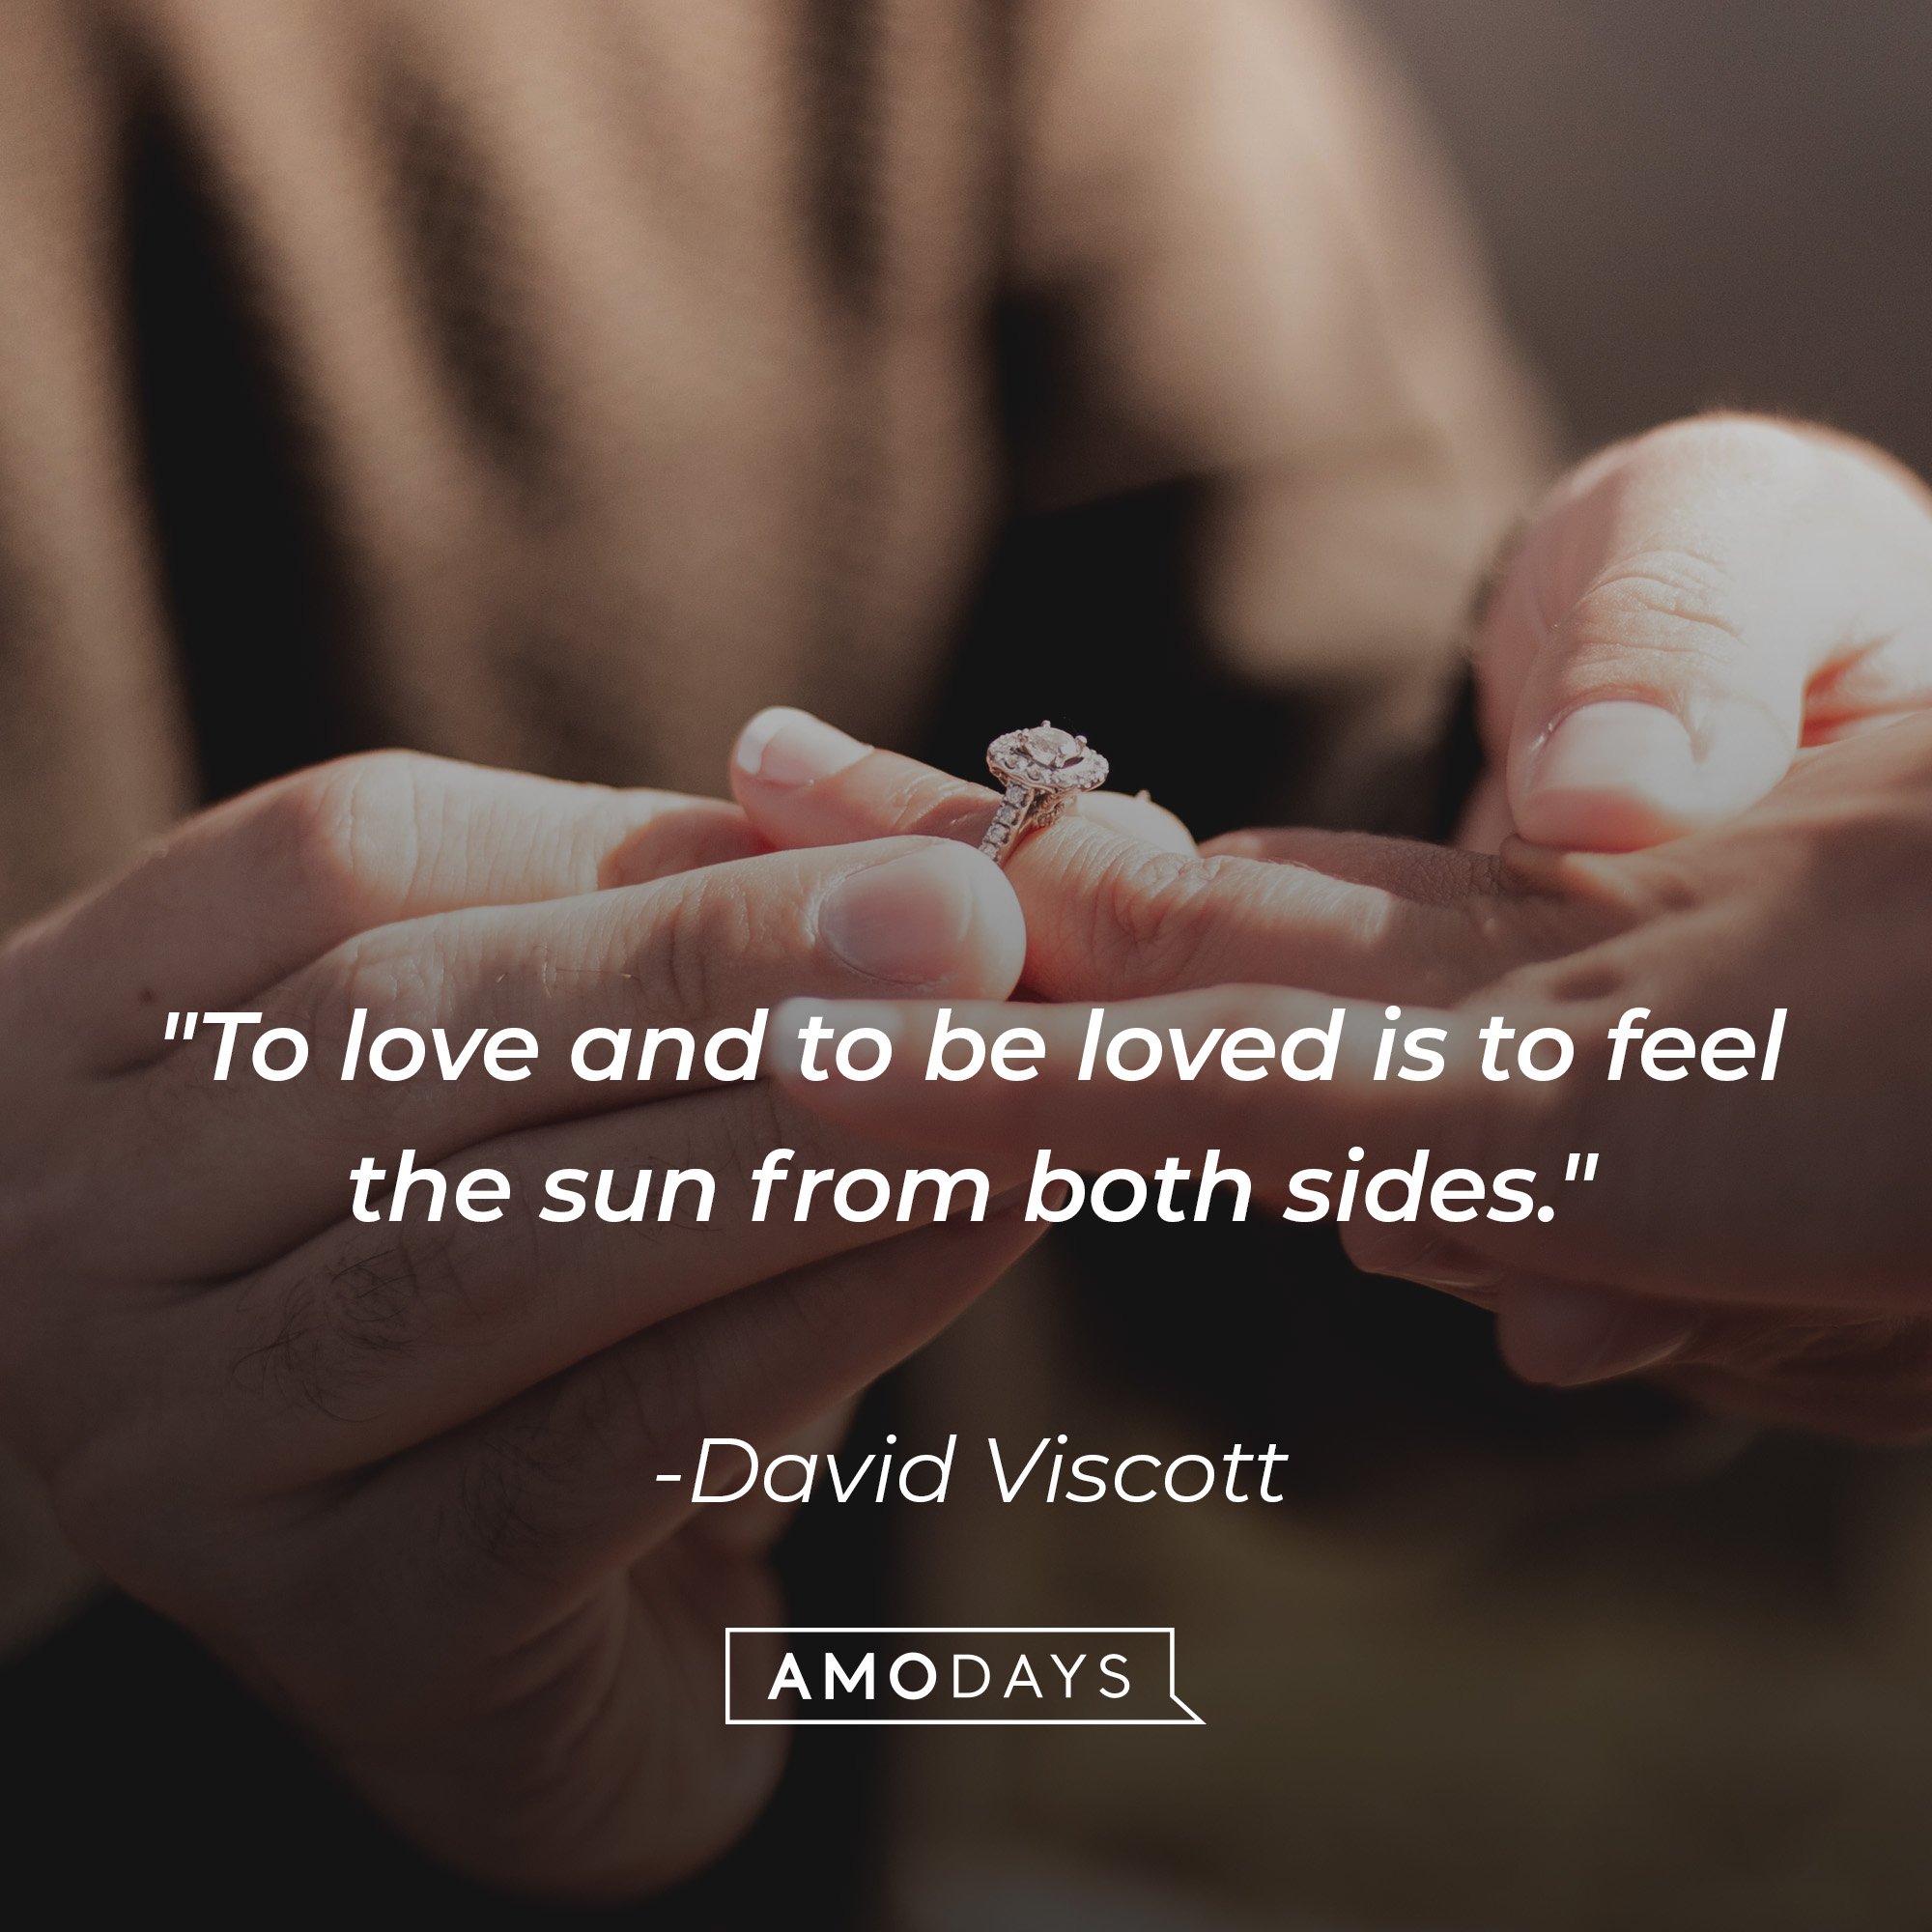 David Viscott's quote: "To love and to be loved is to feel the sun from both sides." | Image: AmoDays